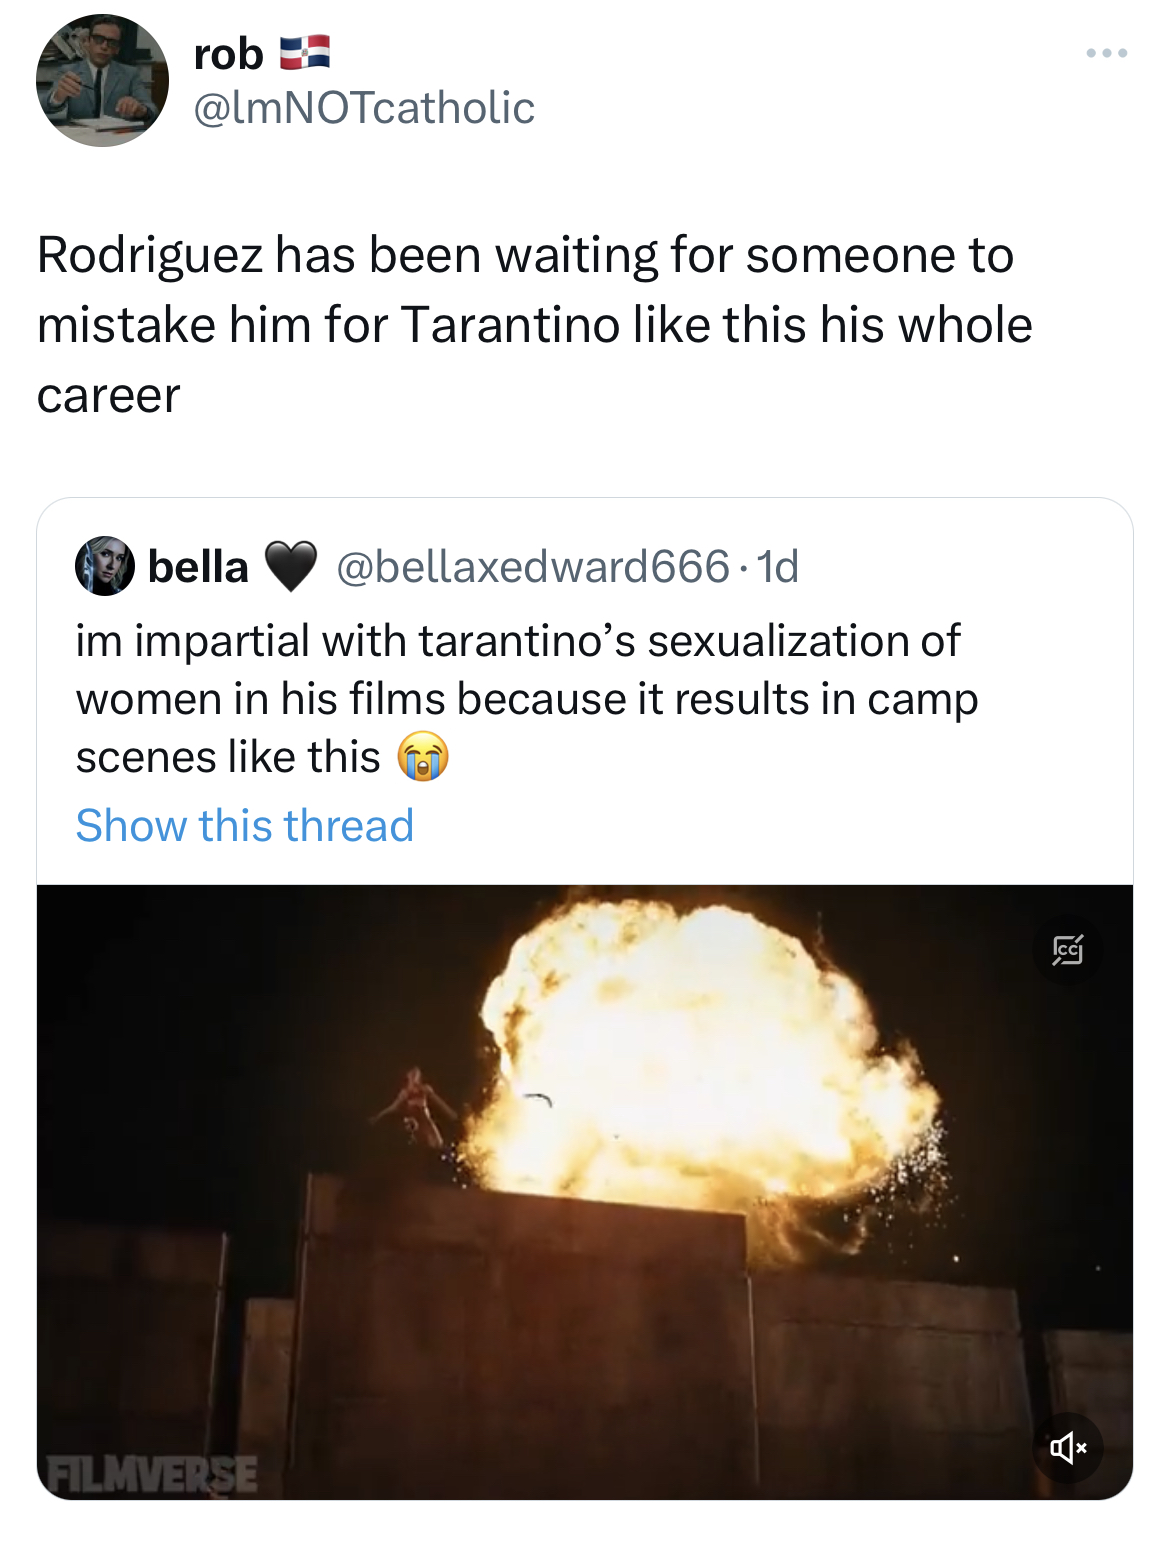 tweets roasting celebs - heat - rob Rodriguez has been waiting for someone to mistake him for Tarantino this his whole career bella .1d im impartial with tarantino's sexualization of women in his films because it results in camp scenes this Show this thre